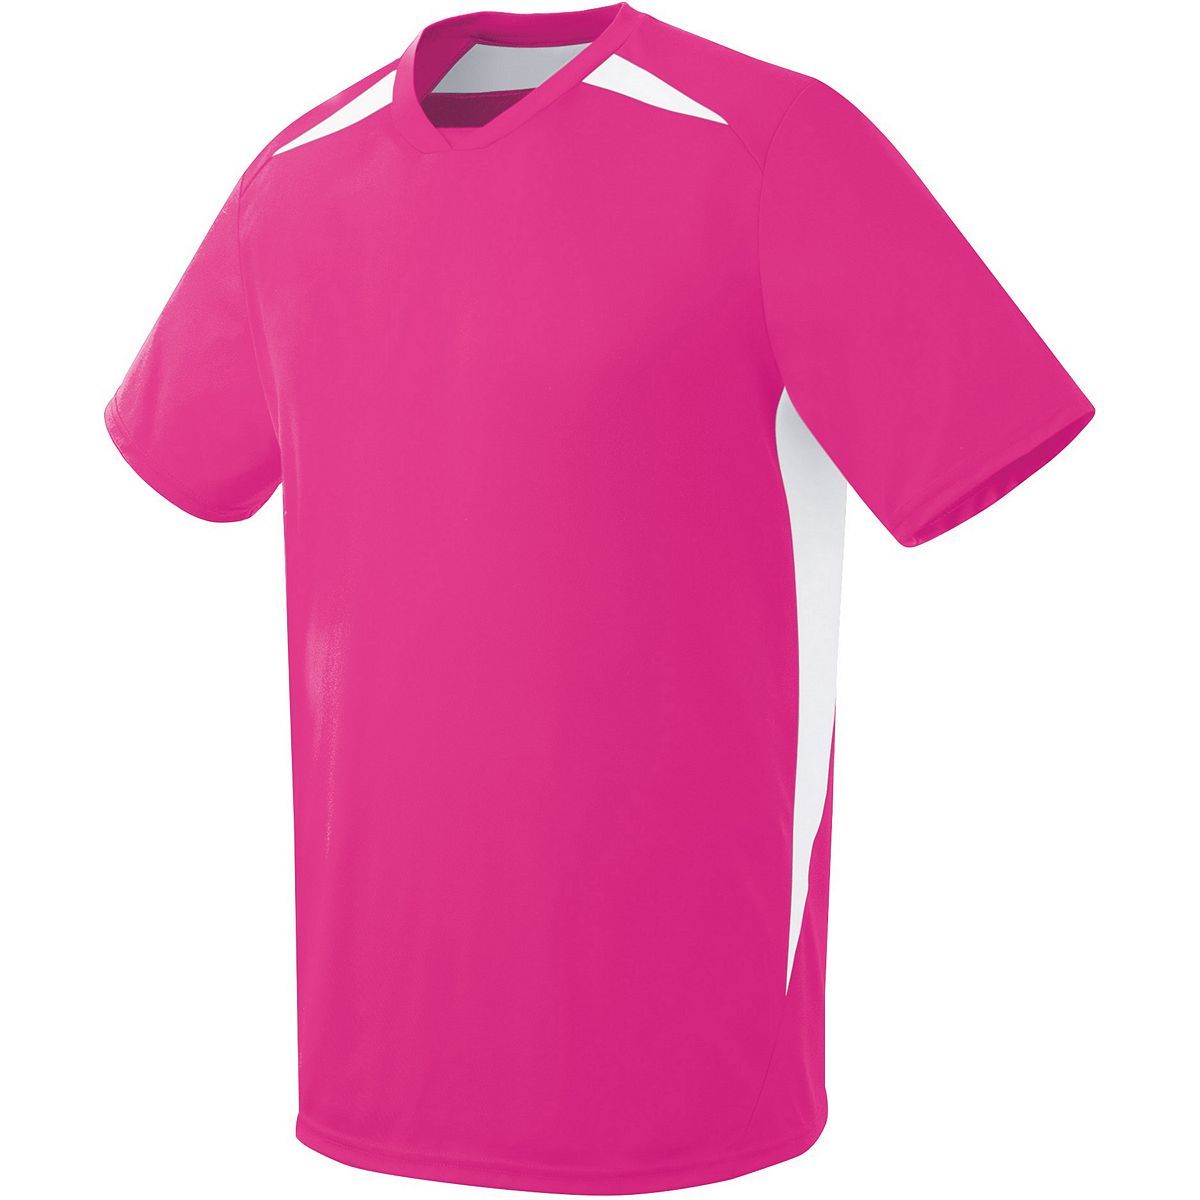 High 5 Adult Hawk Jersey in Raspberry/White  -Part of the Adult, Adult-Jersey, High5-Products, Soccer, Shirts, All-Sports-1 product lines at KanaleyCreations.com